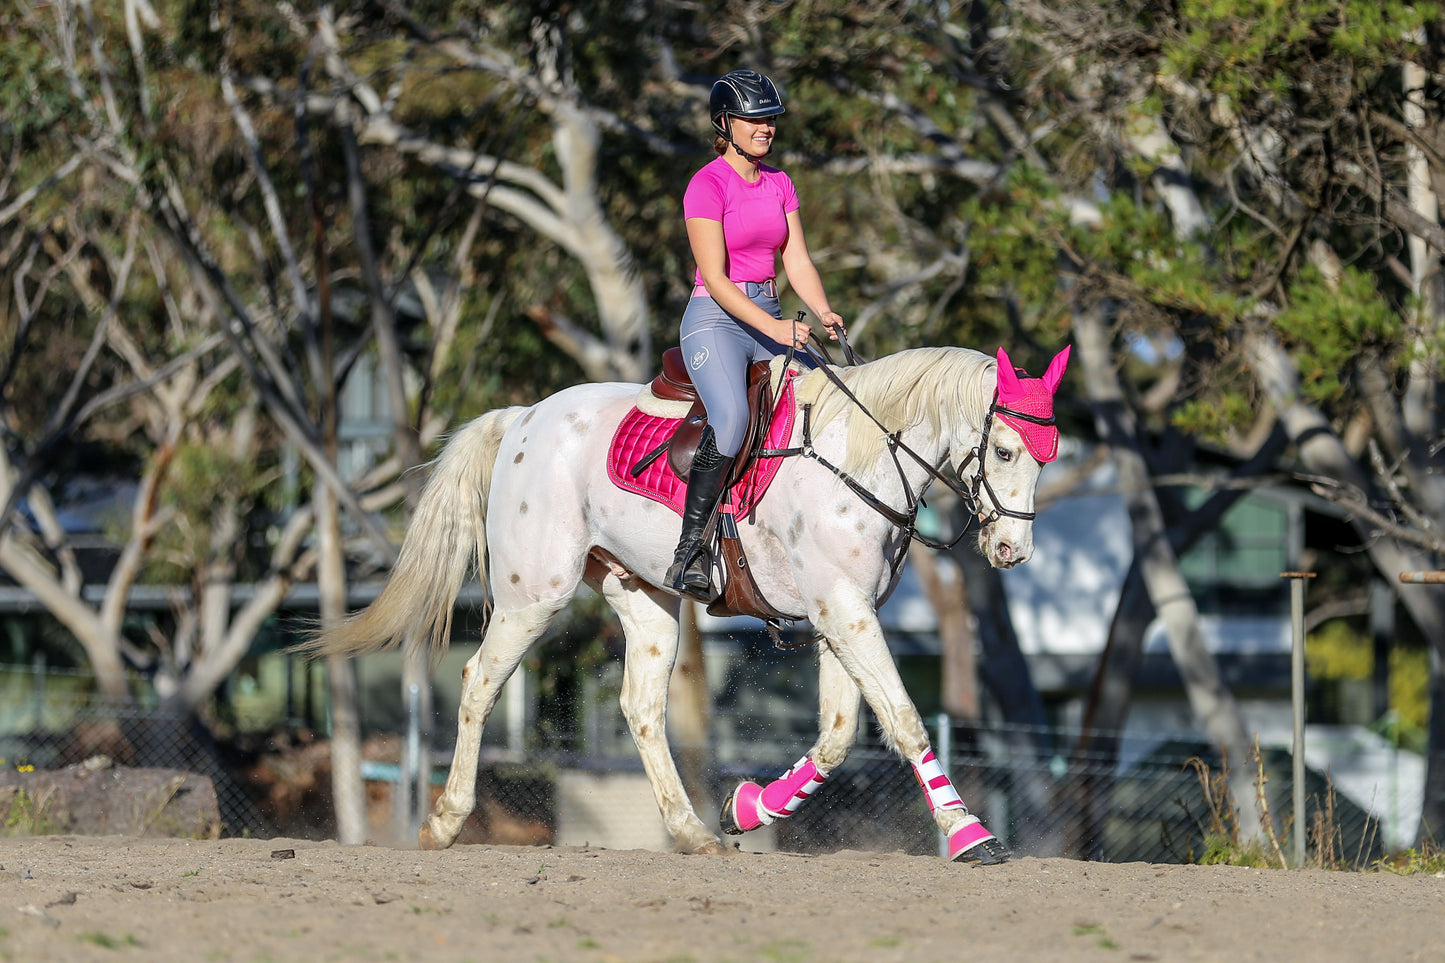 Stereotypical Barbie Deluxe Crystal Satin Saddle Pad